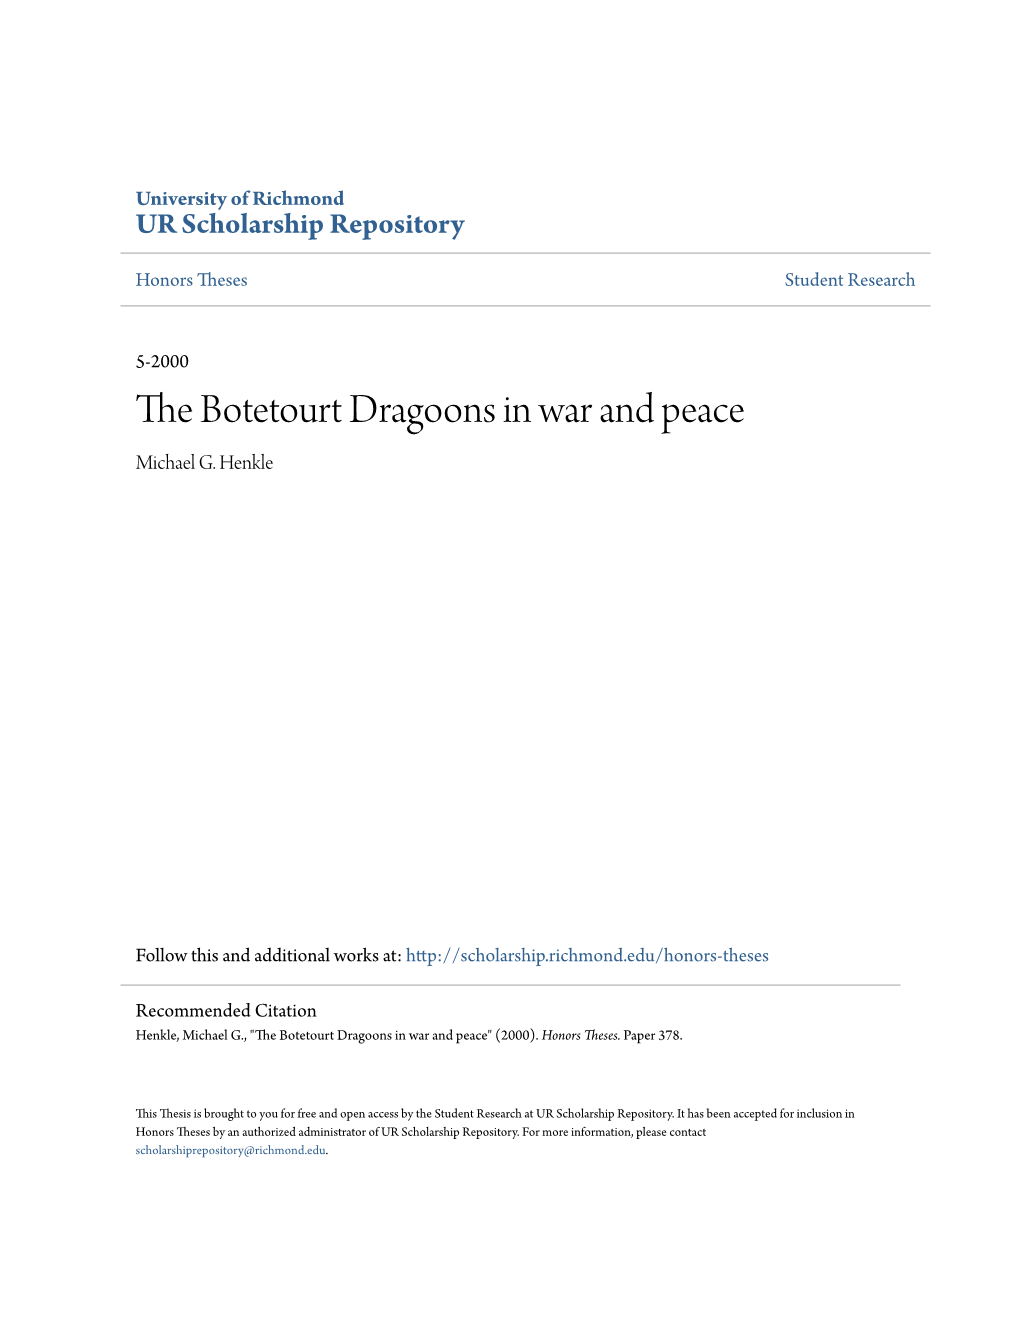 The Botetourt Dragoons in War and Peace Michael G